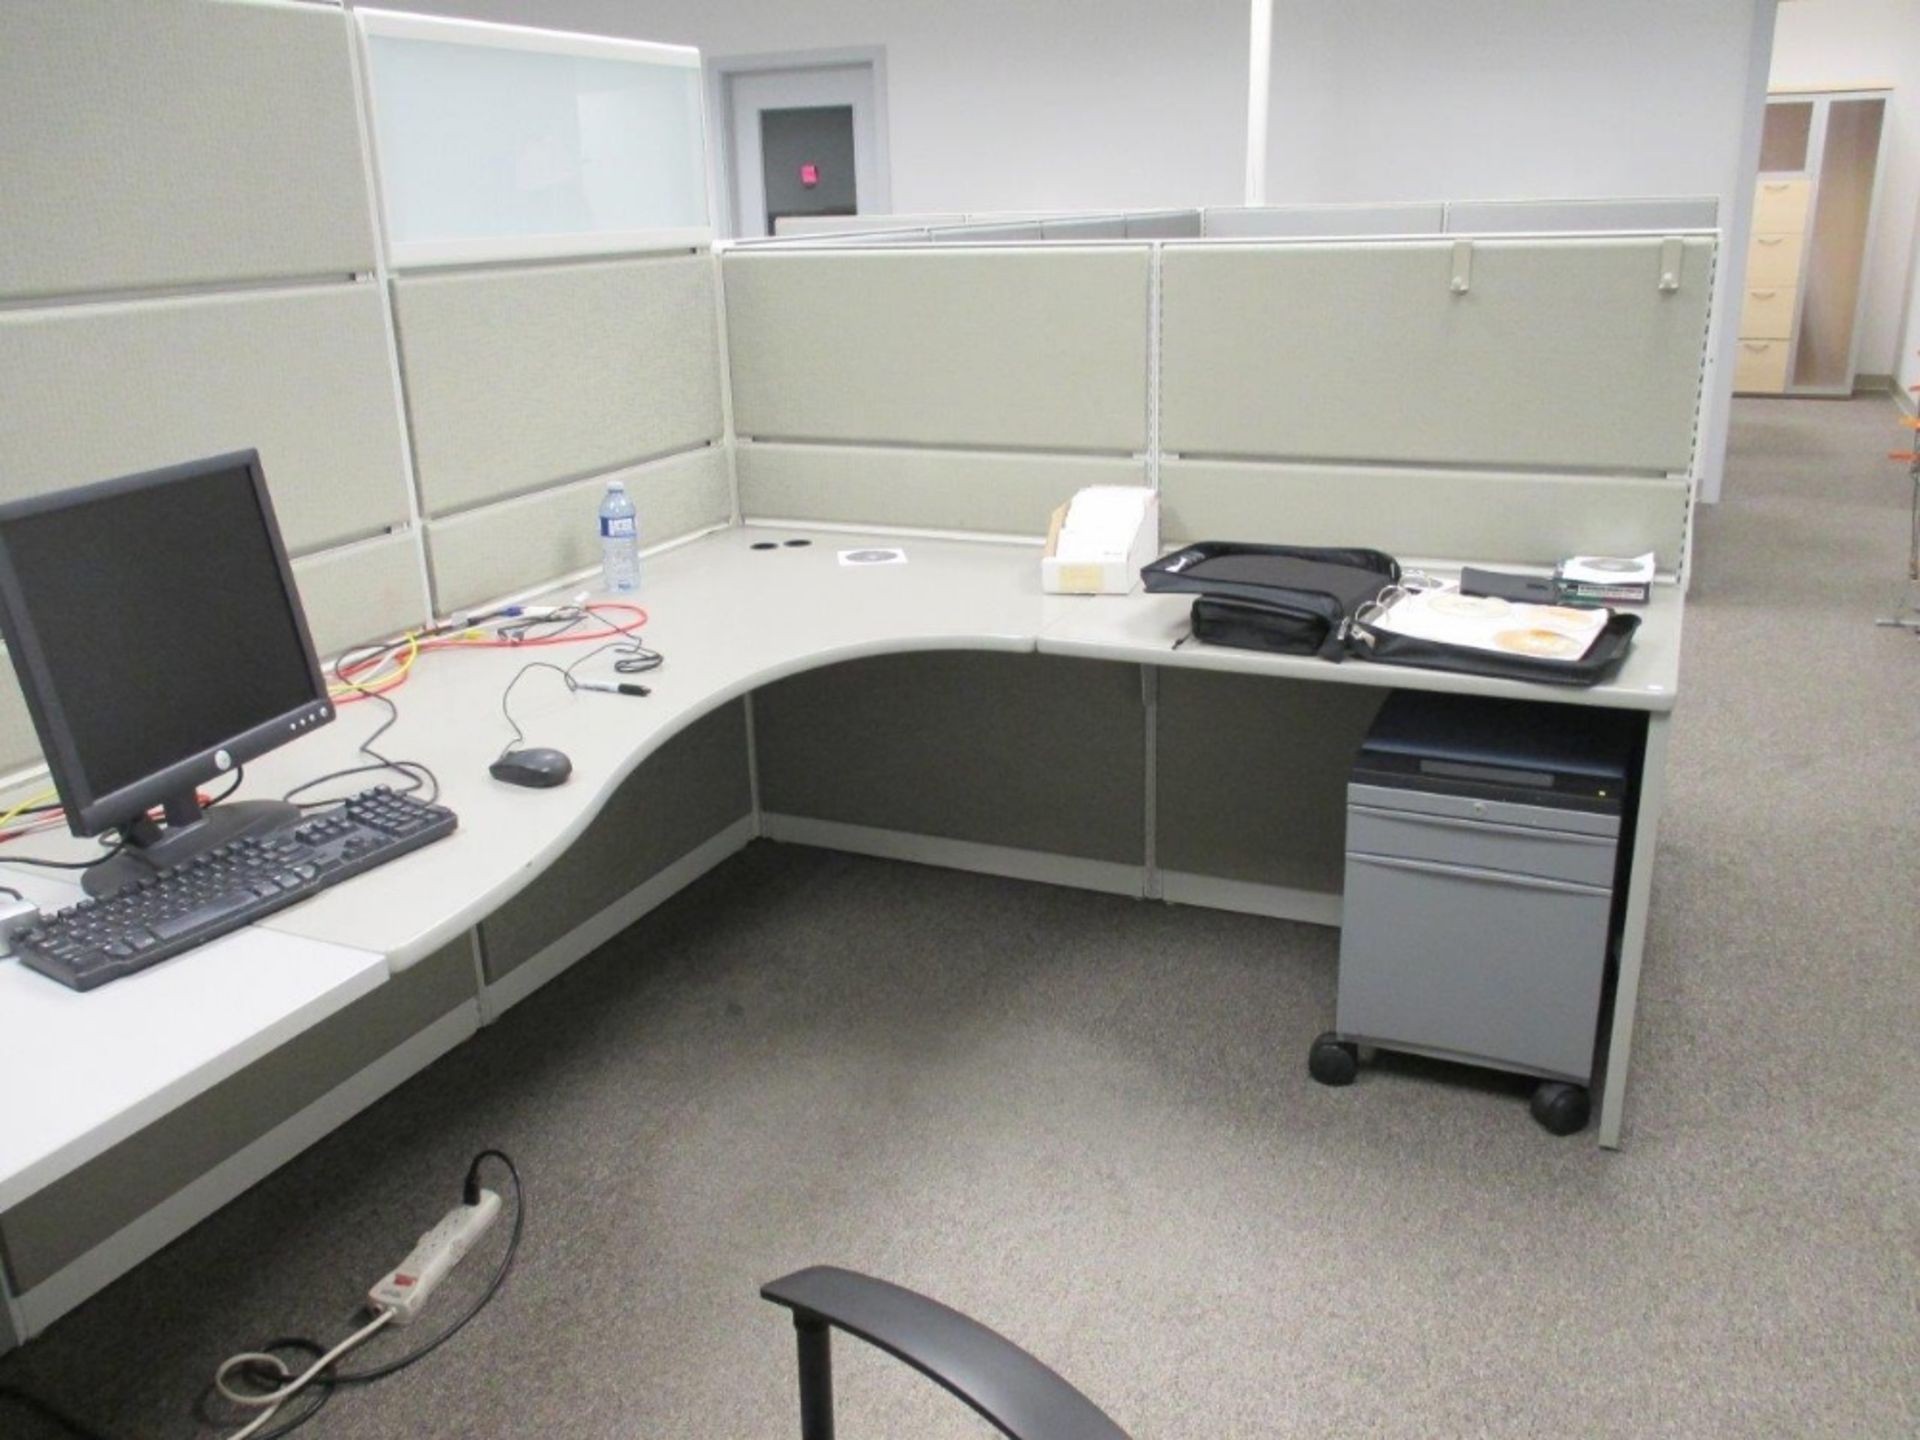 2008 Tecknion 8 Station Work Cubicle System - Image 6 of 6